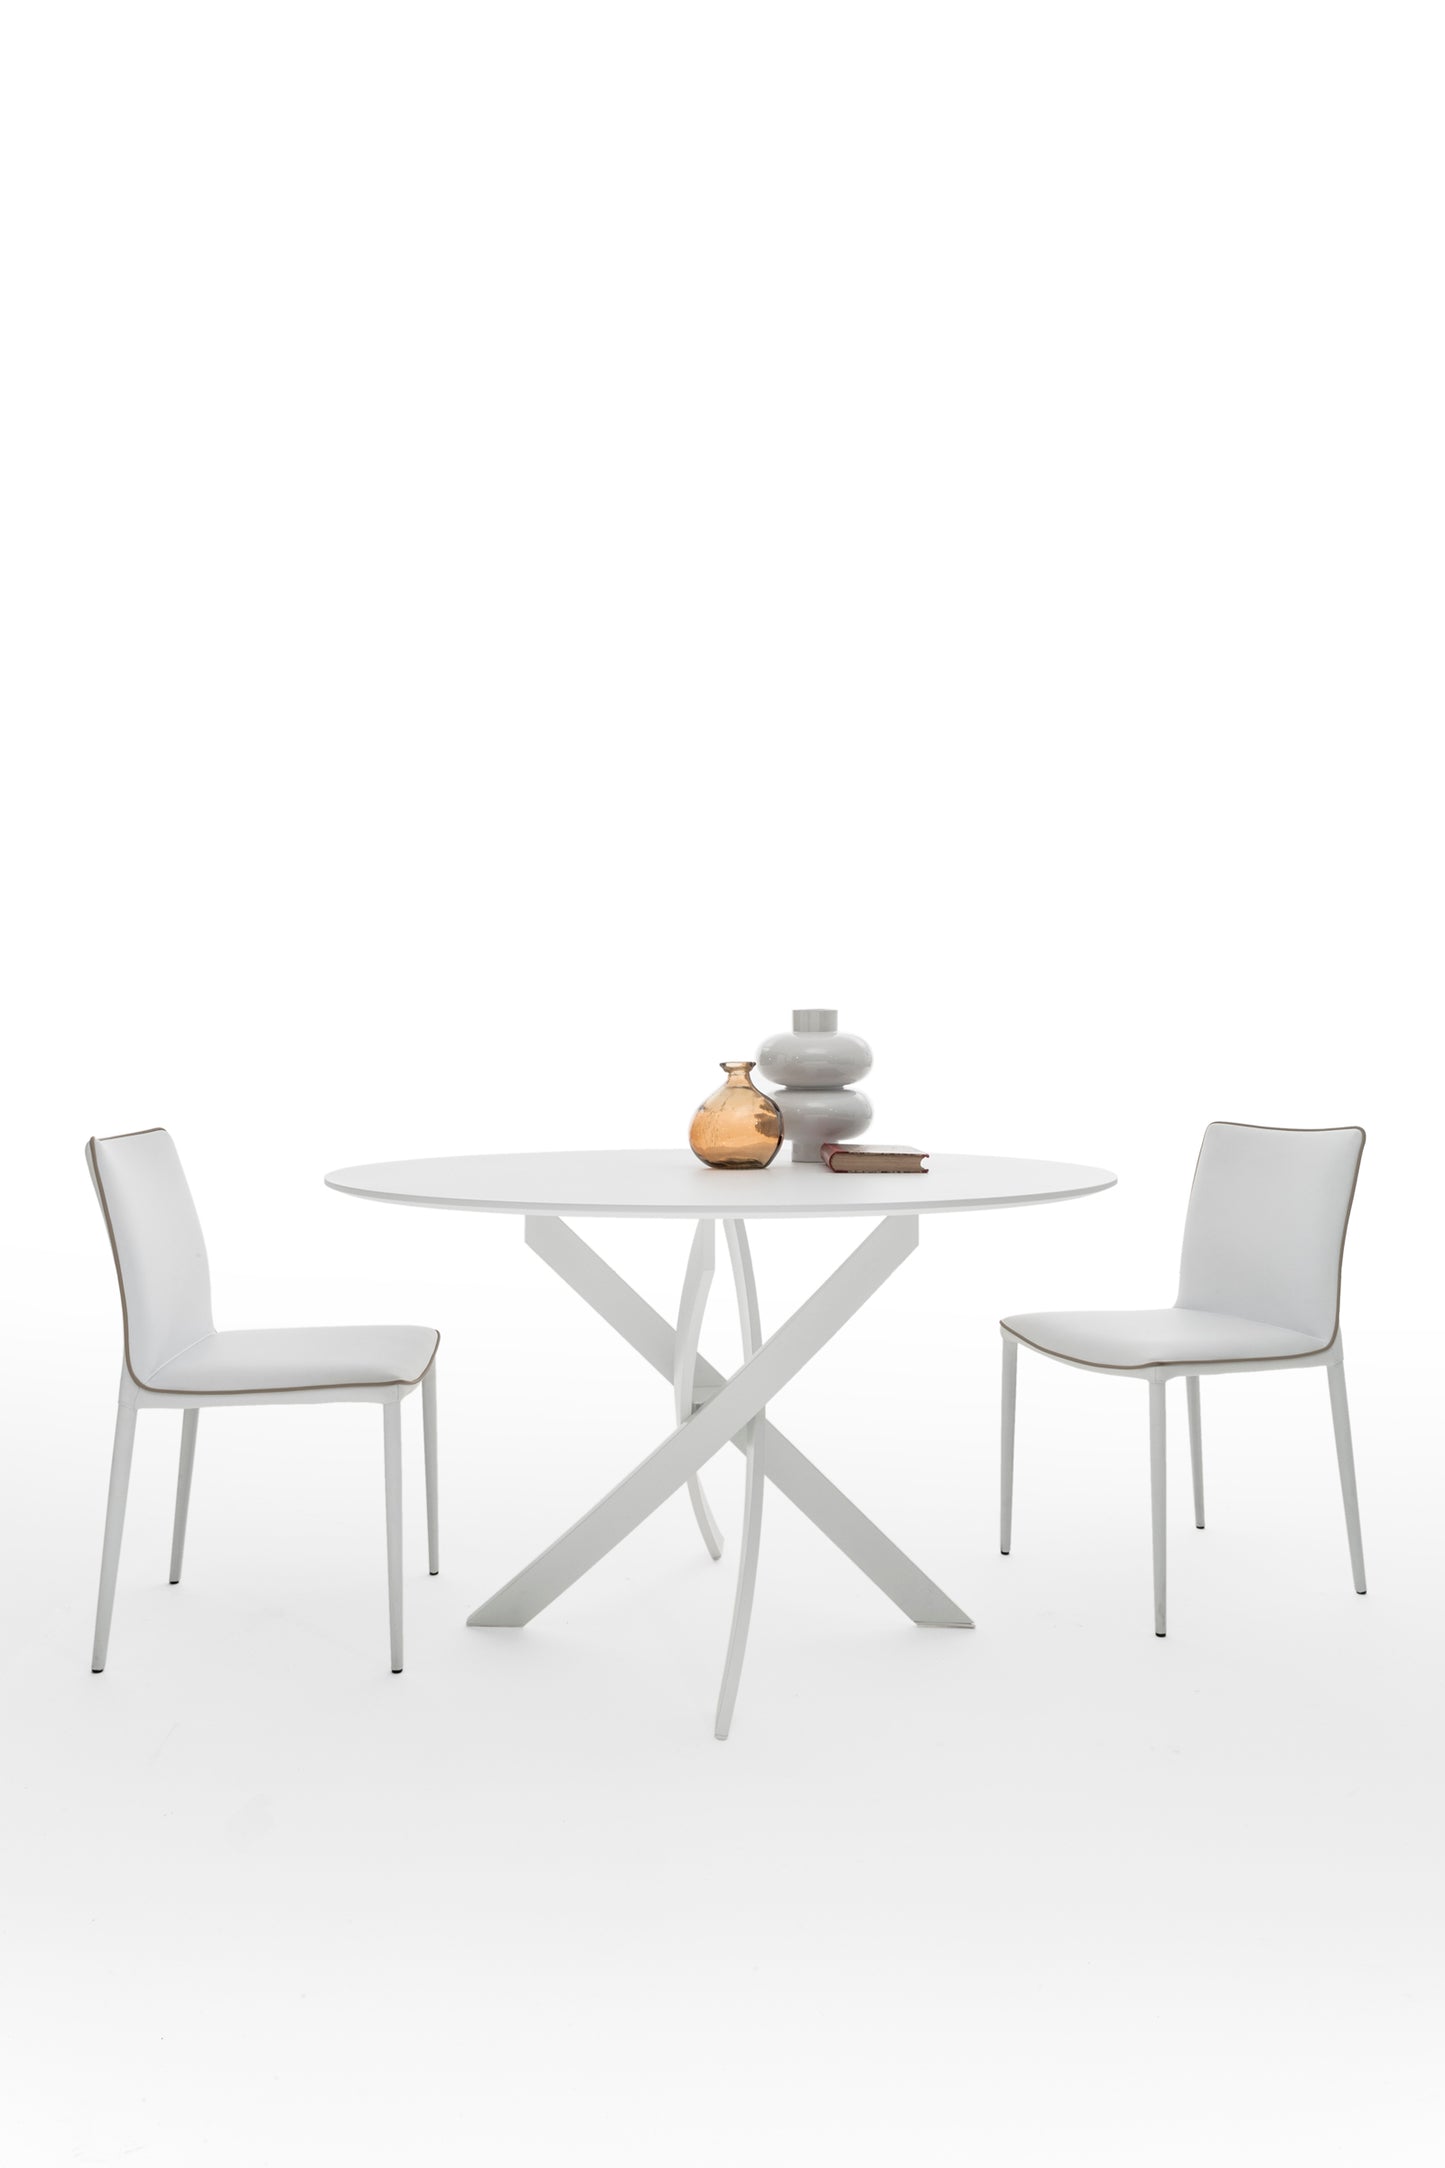 Barone Round Fixed Dining Table